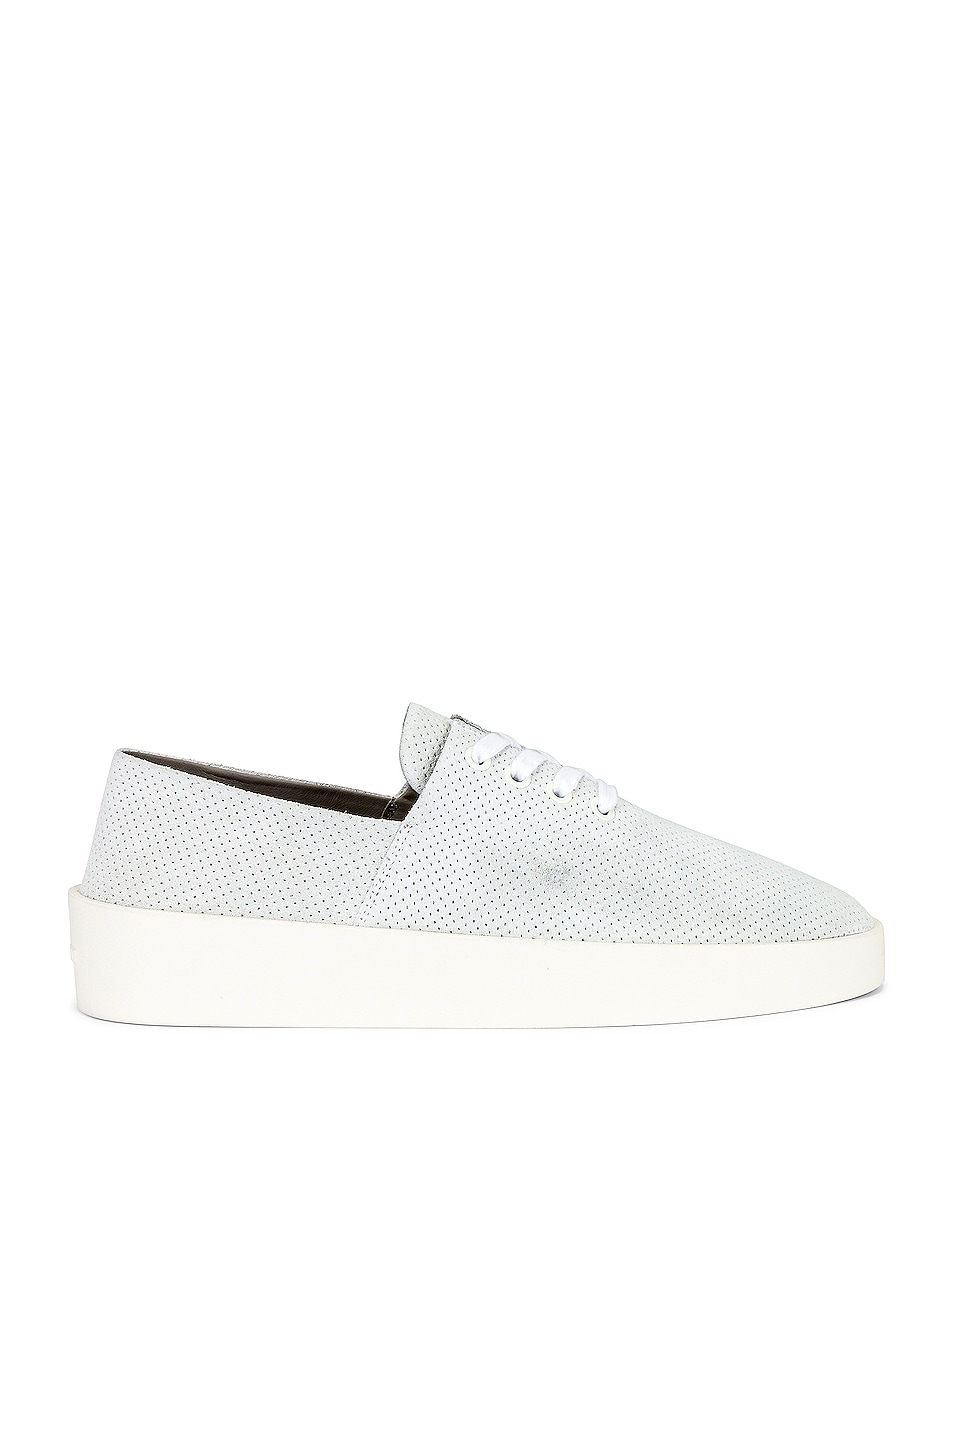 Image 1 of Fear of God 110 Sneaker in White